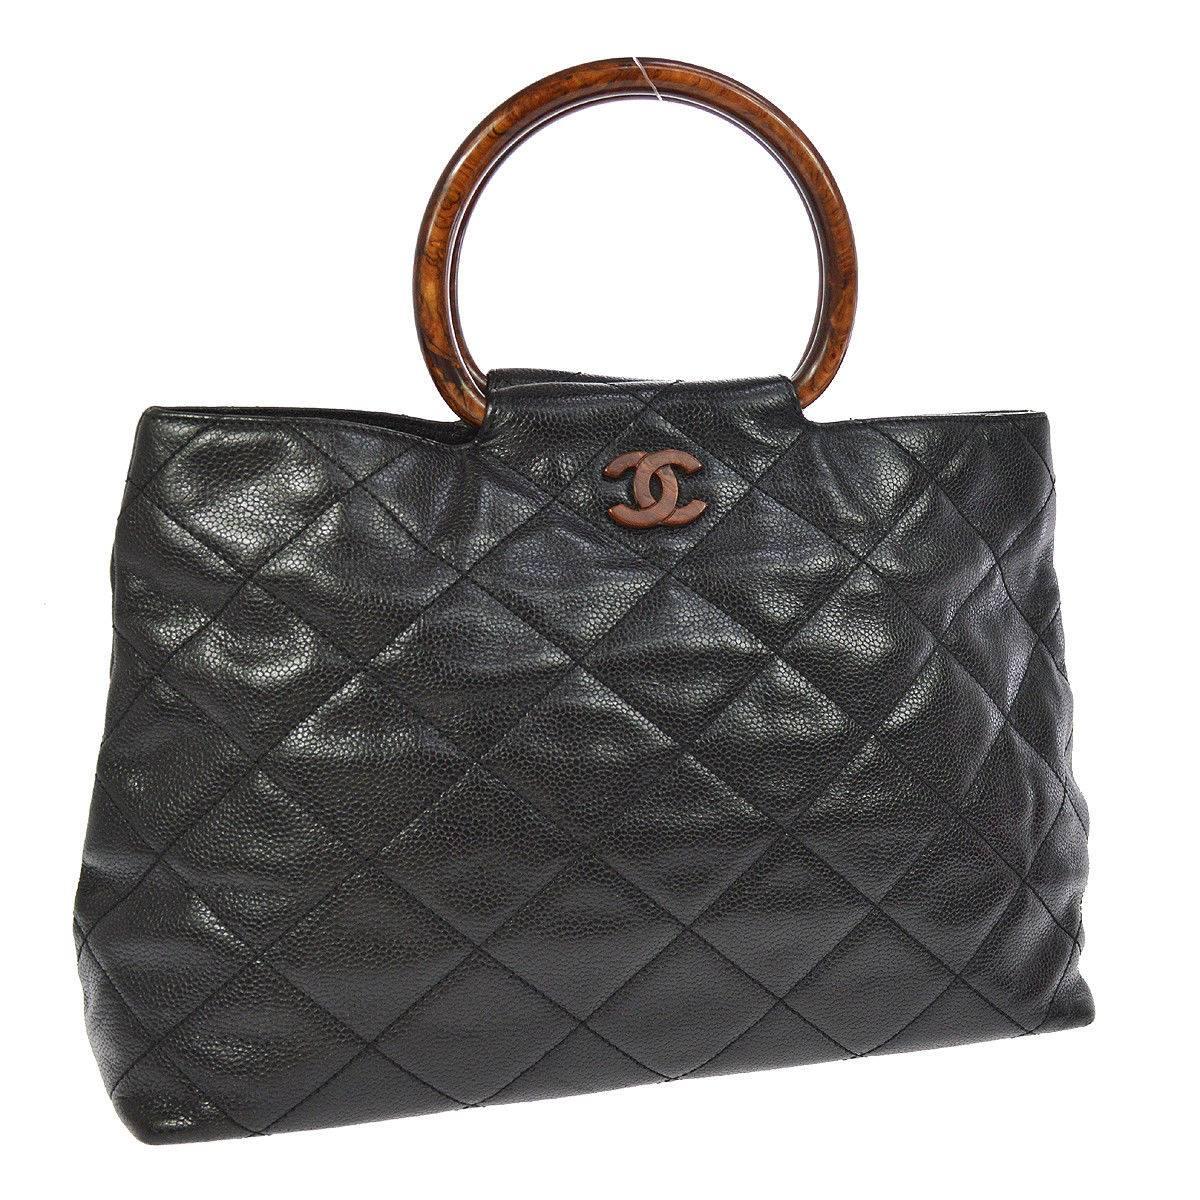 Chanel Black Leather Cross Stitch Kelly Brown Top Handle Satchel Bag